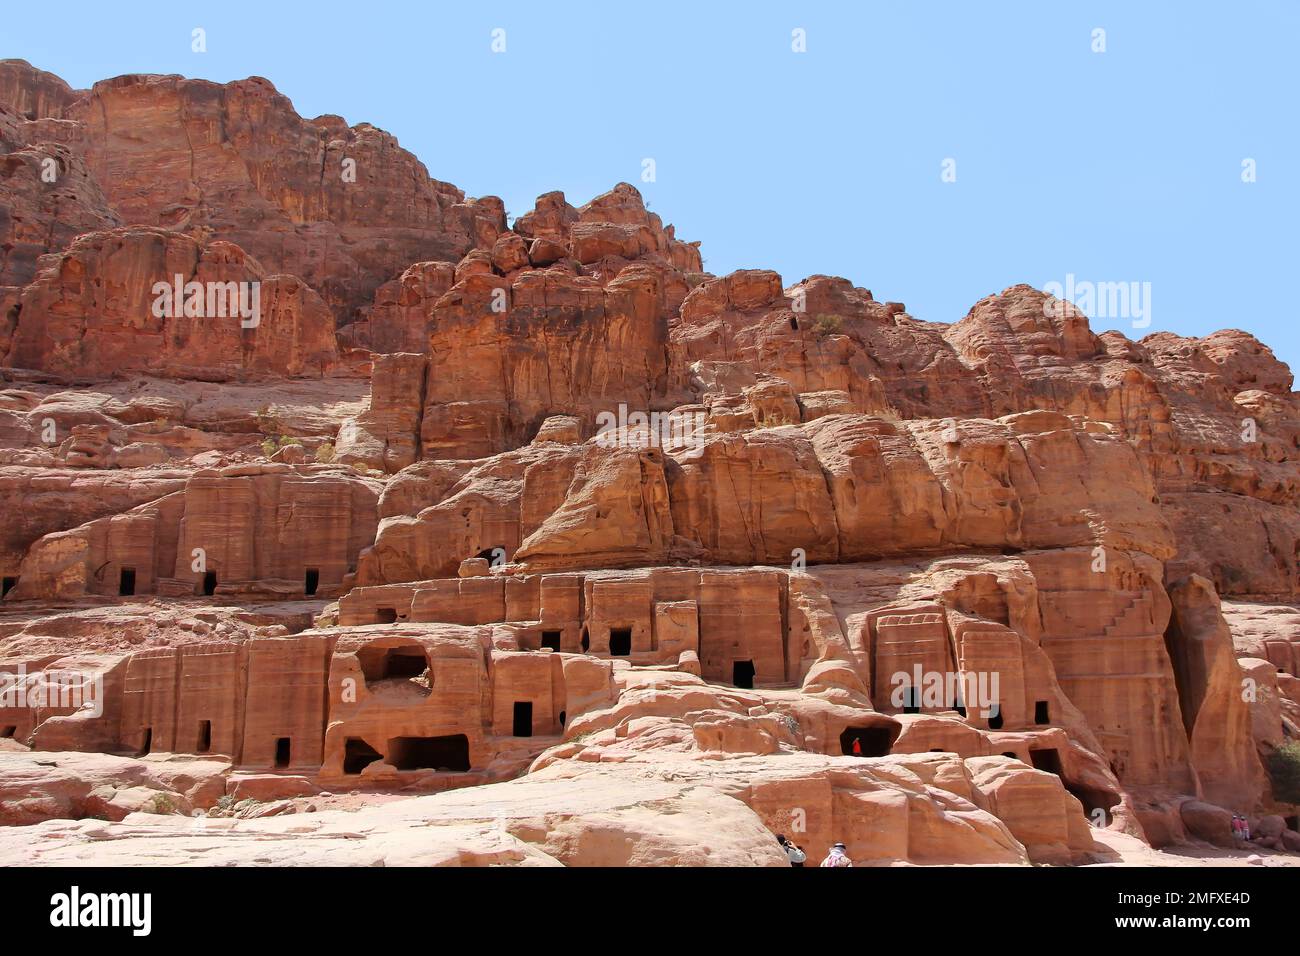 Cave dwellings in the ancient city of Petra, Jordan Stock Photo